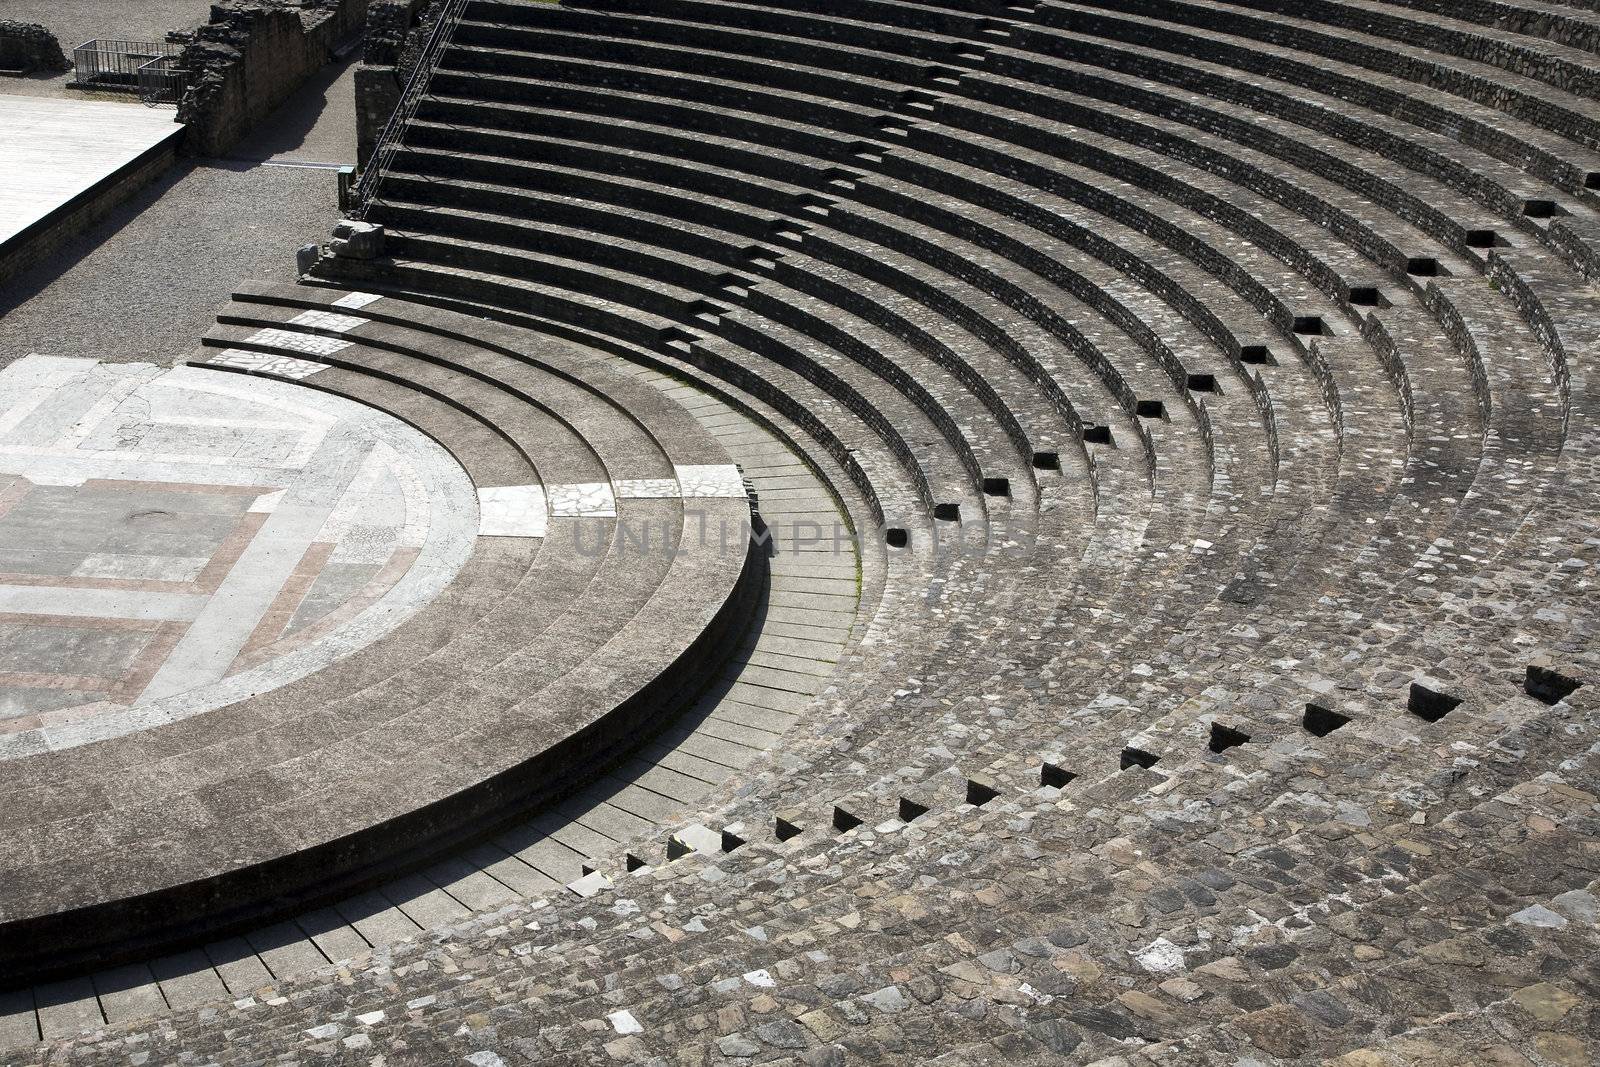 Remains of the Ancient Theater of Fourvière in Lyon, France.